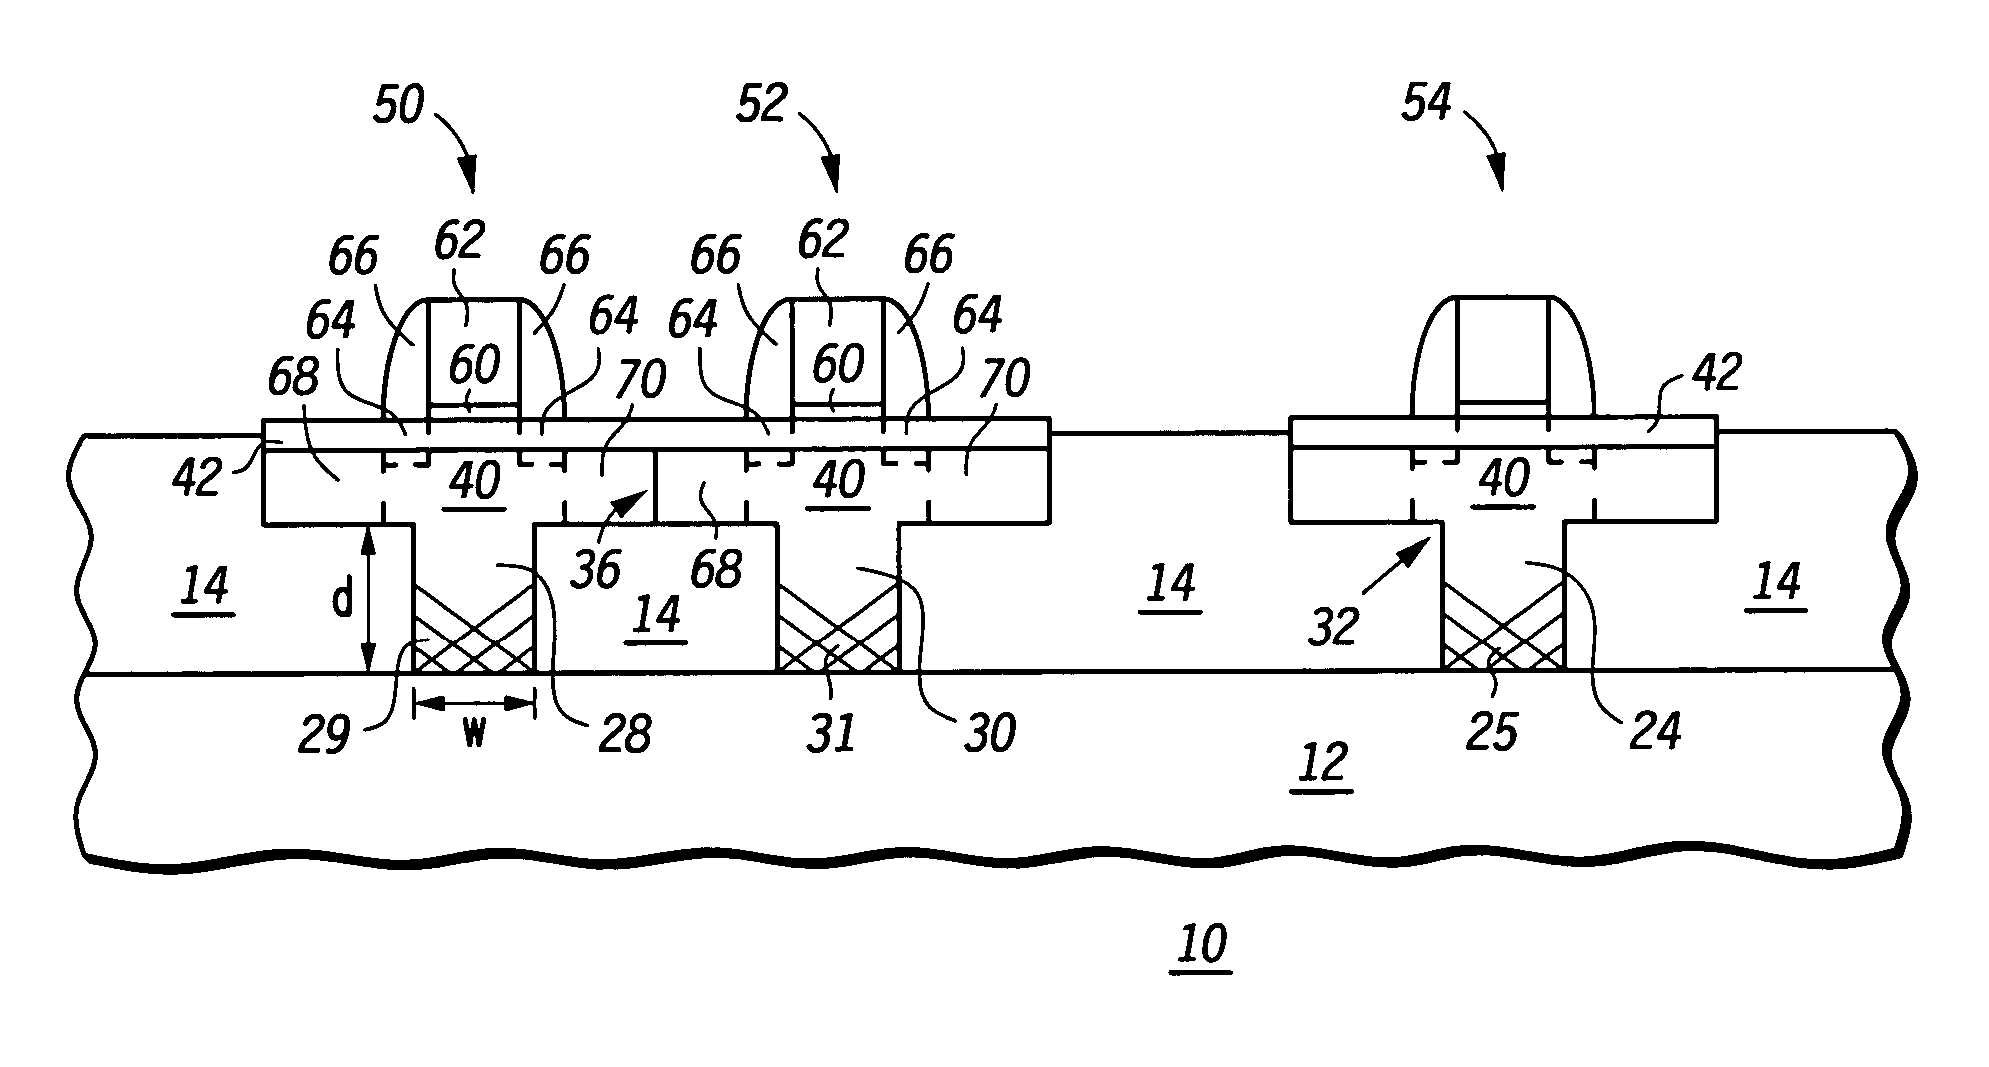 Semiconductor device incorporating a defect controlled strained channel structure and method of making the same